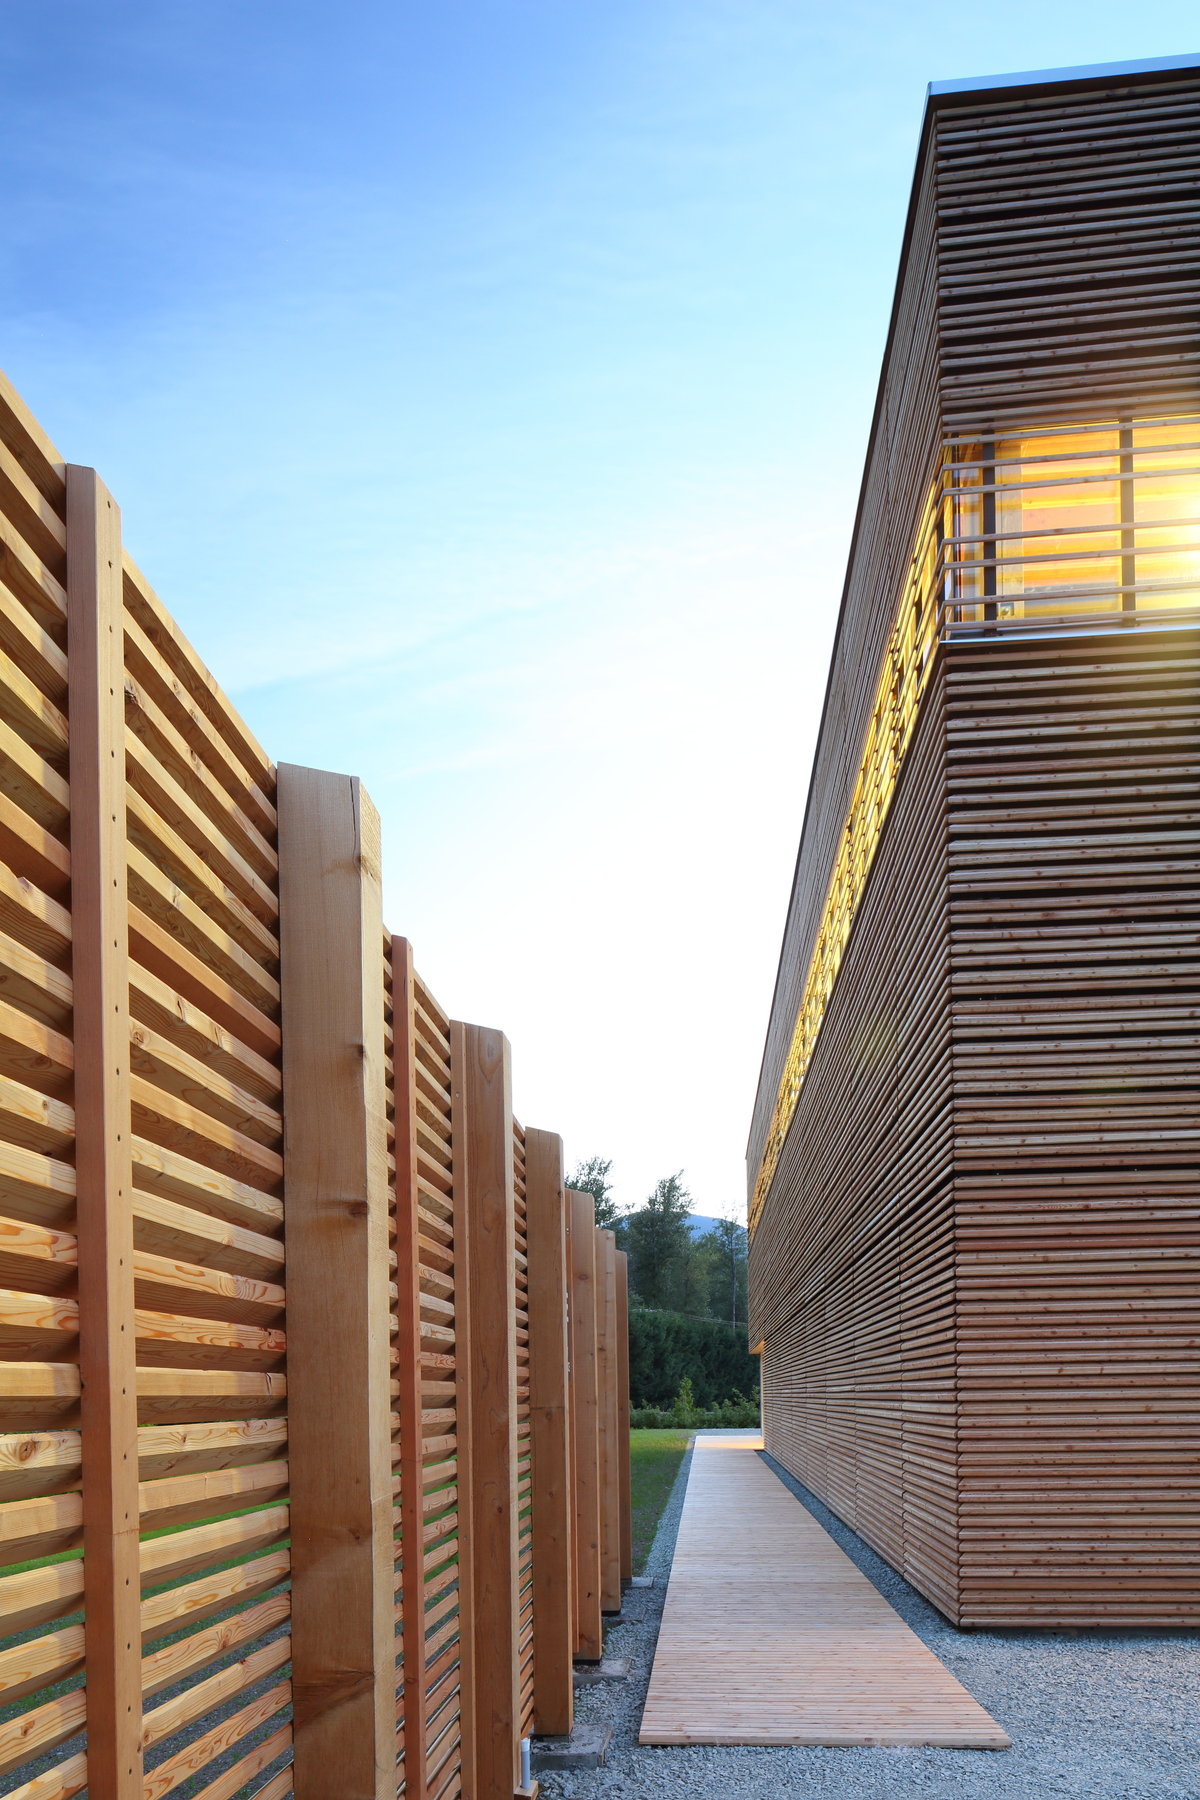 Exterior afternoon view of completed BC Passive House Factory, a low rise passive house structure built with light frame and mass timber components, showing wrap around exterior wood slats, wooden walkway, and decorative wooden fencing